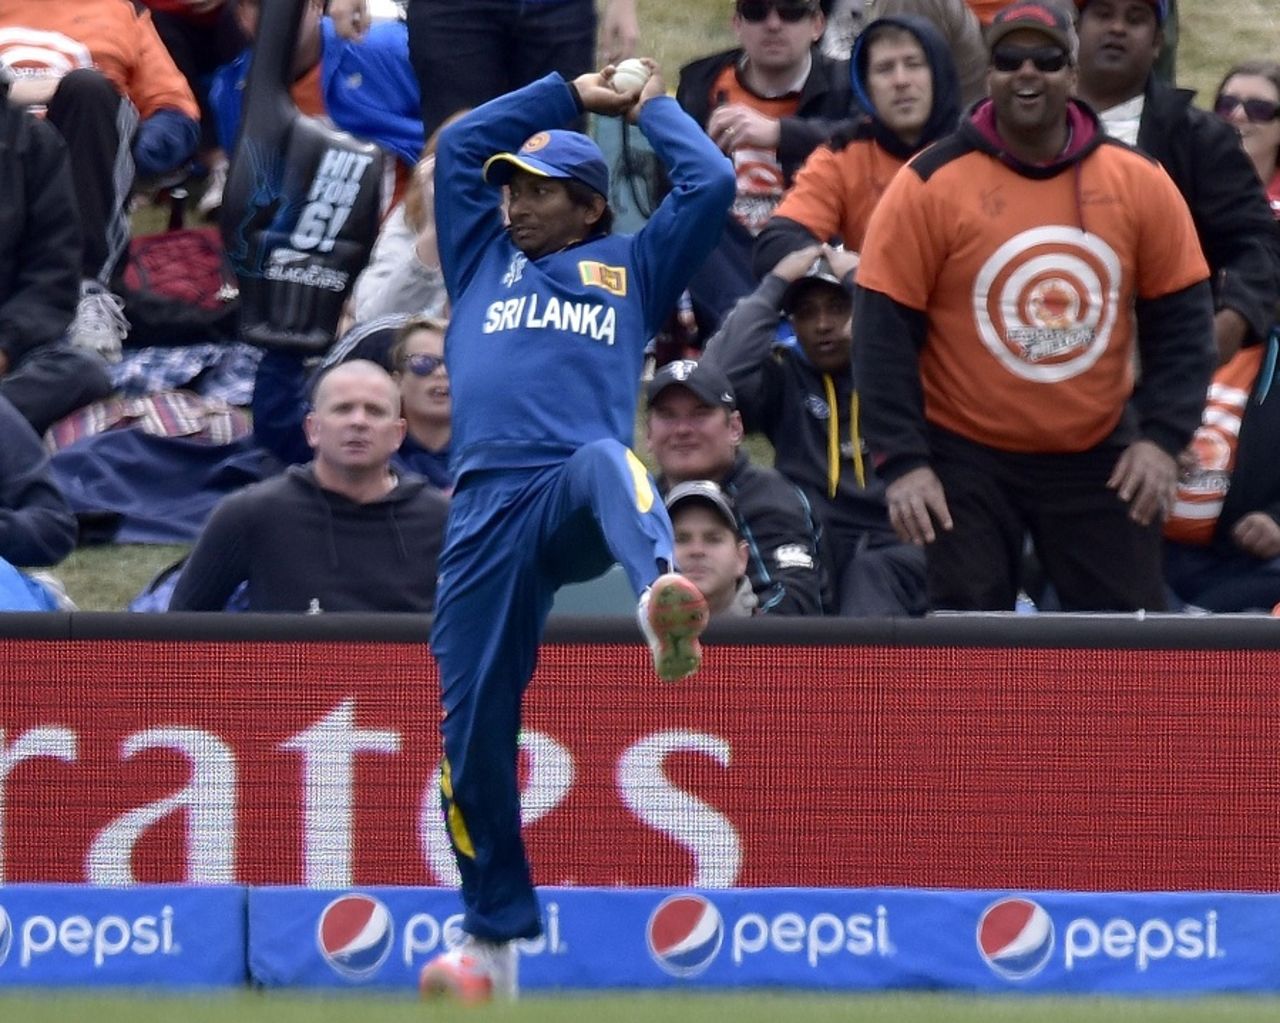 Jeevan Mendis takes a sharp catch in the deep to dismiss Brendon McCullum, New Zealand v Sri Lanka, Group A, World Cup 2015, Christchurch, February 14, 2015